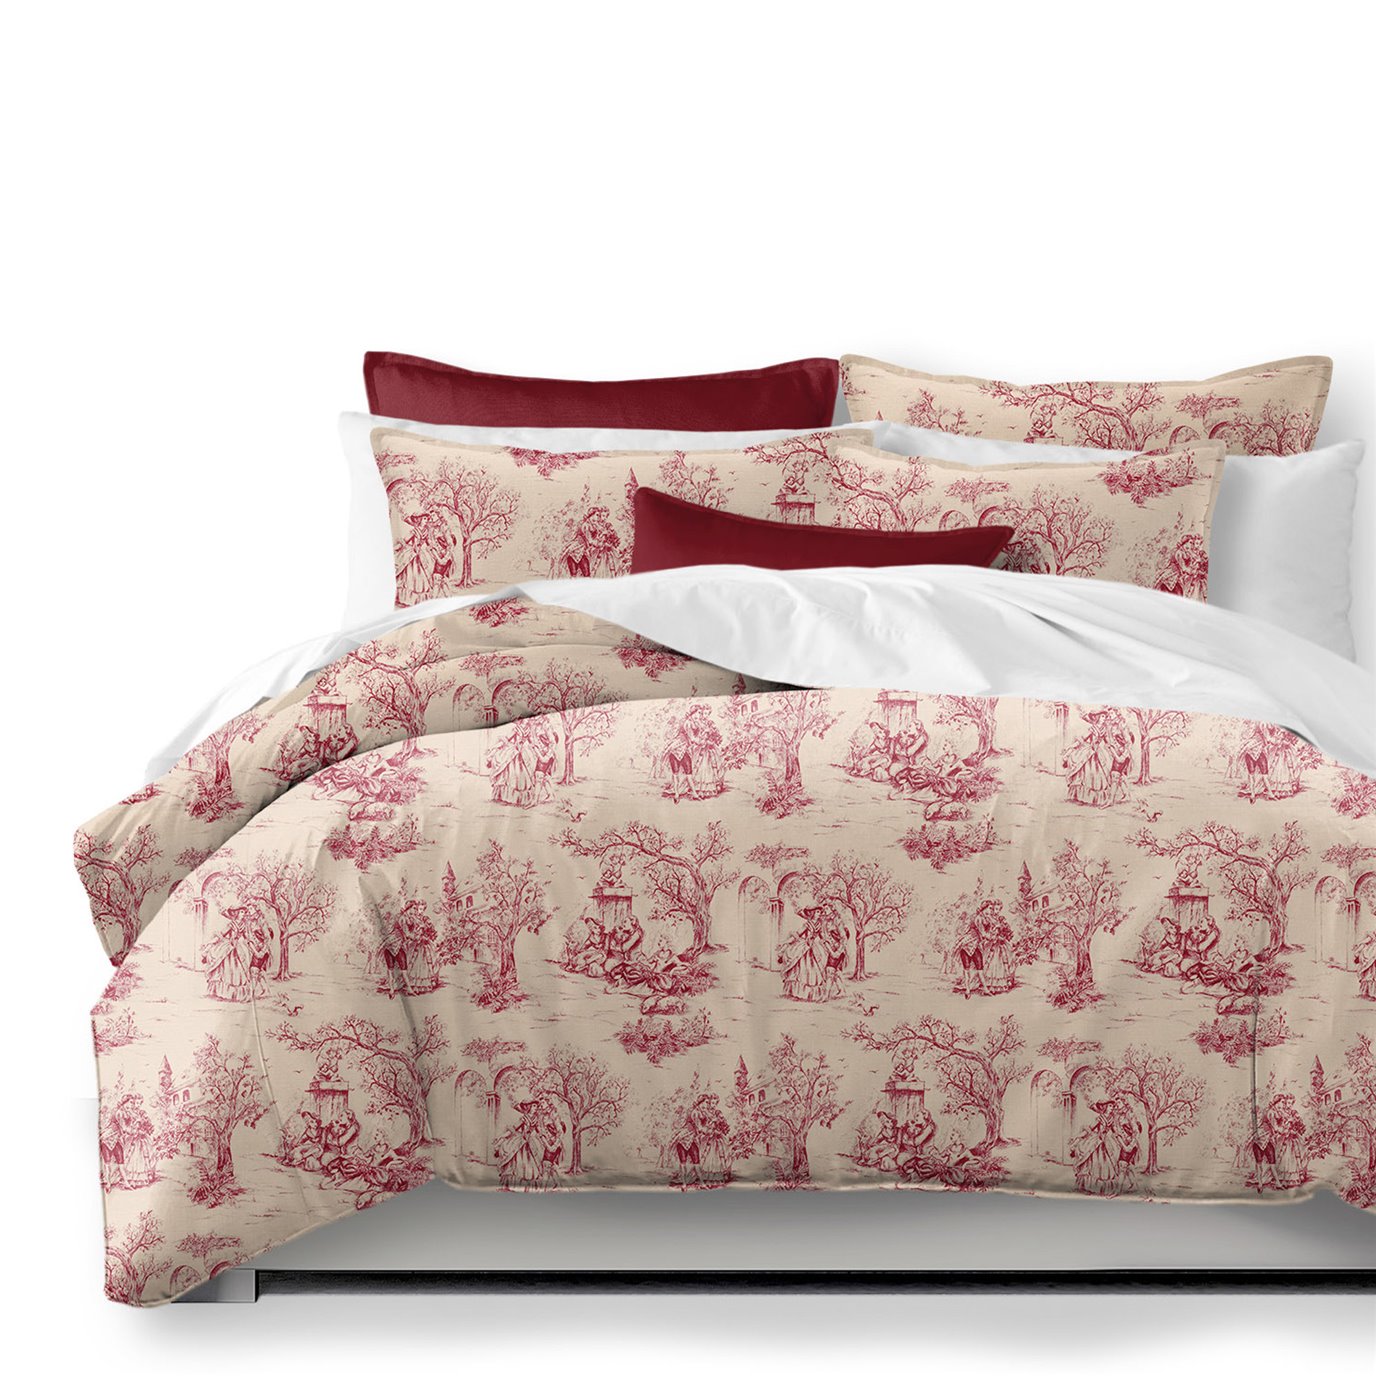 Archamps Toile Red Comforter and Pillow Sham(s) Set - Size Full